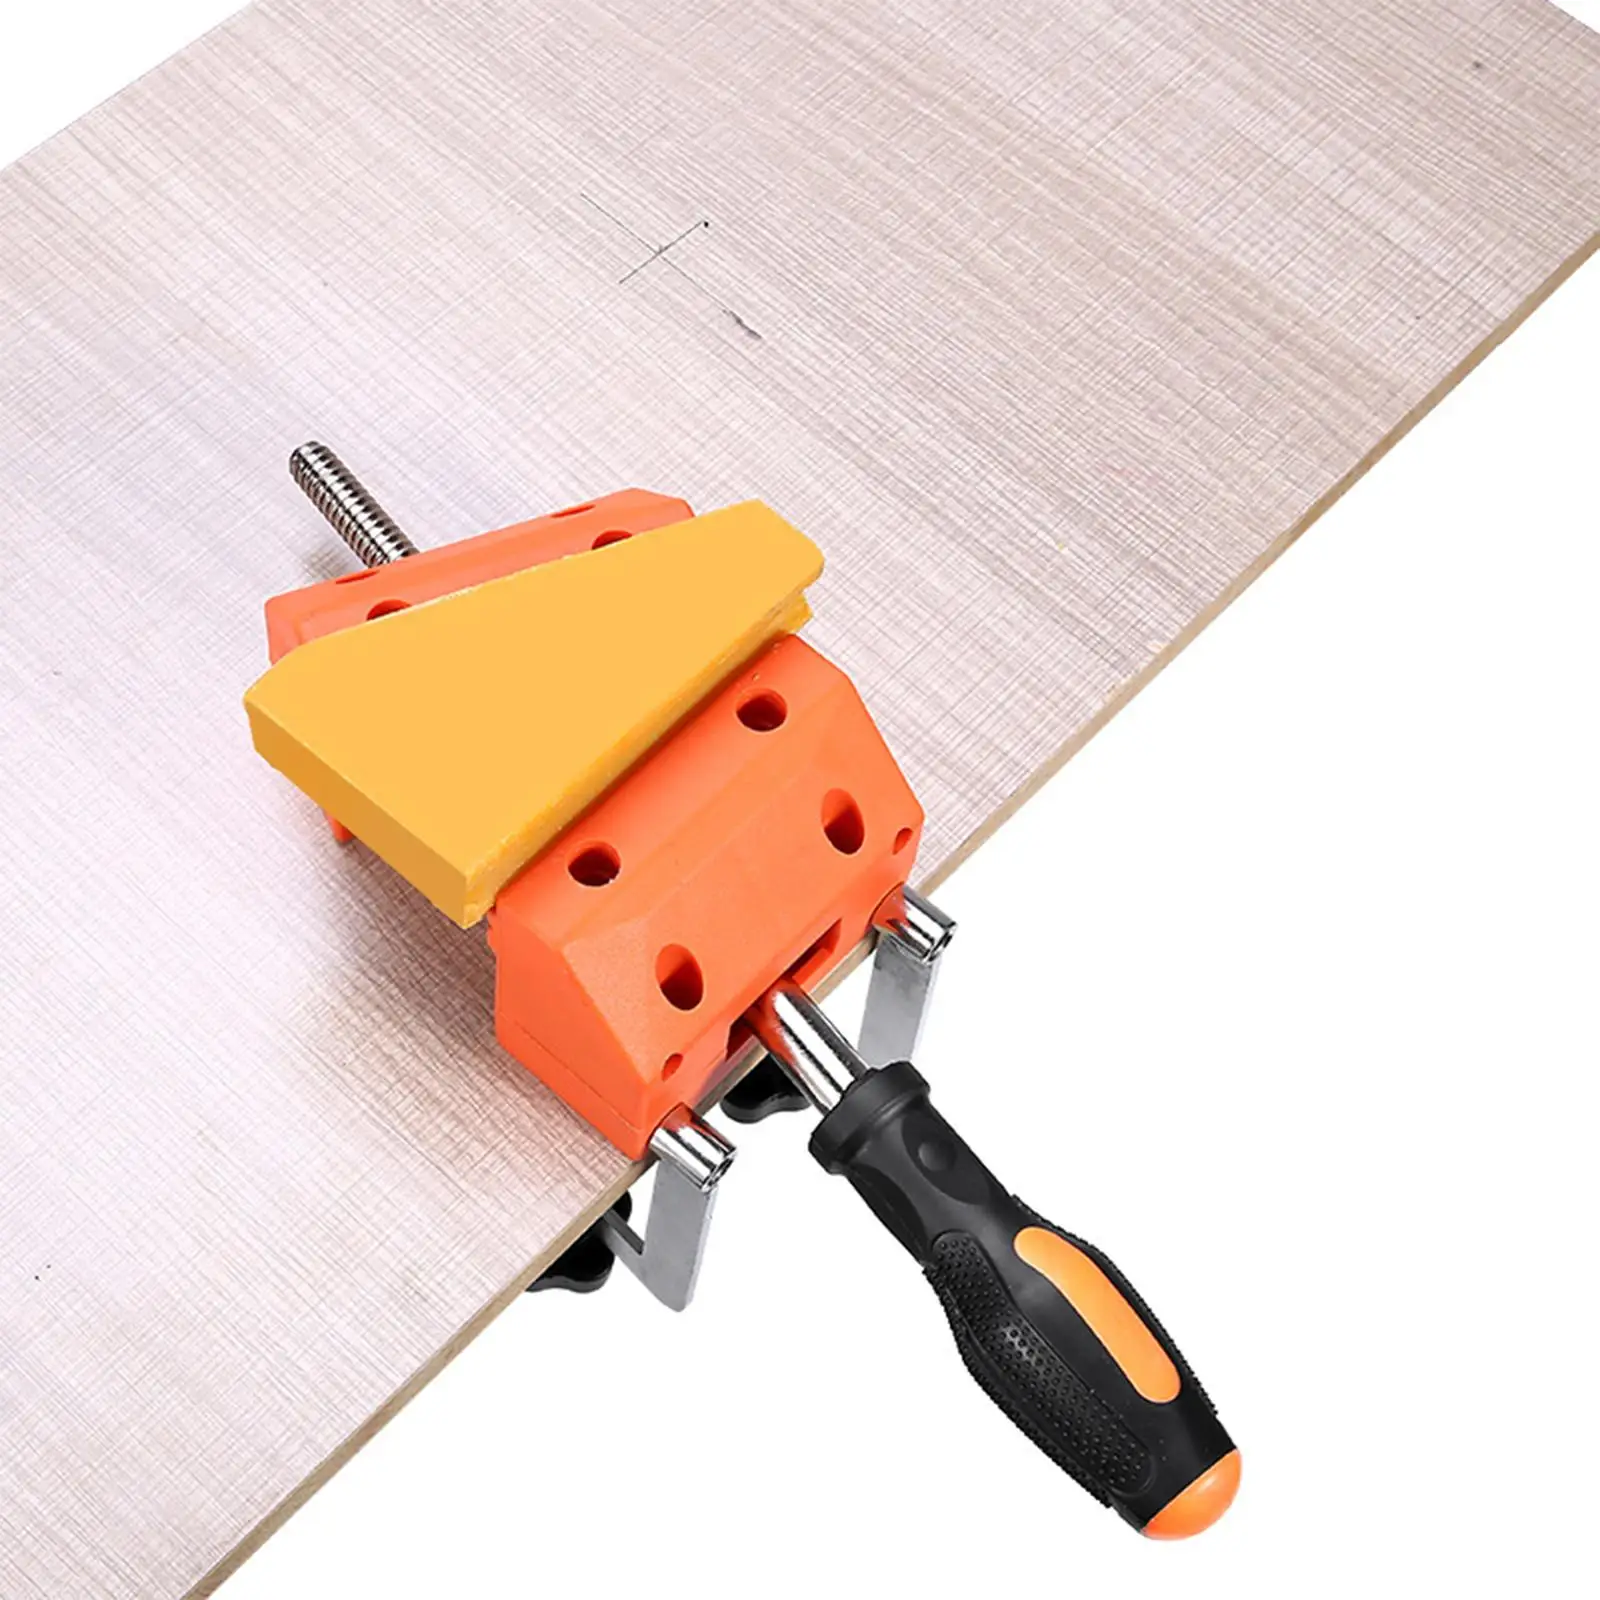 Woodworking Bench Vise Heavy Duty Universal Vise Workbench Vise Table Vise Clamp Home Vice for Home Woodworking Studios Supplies